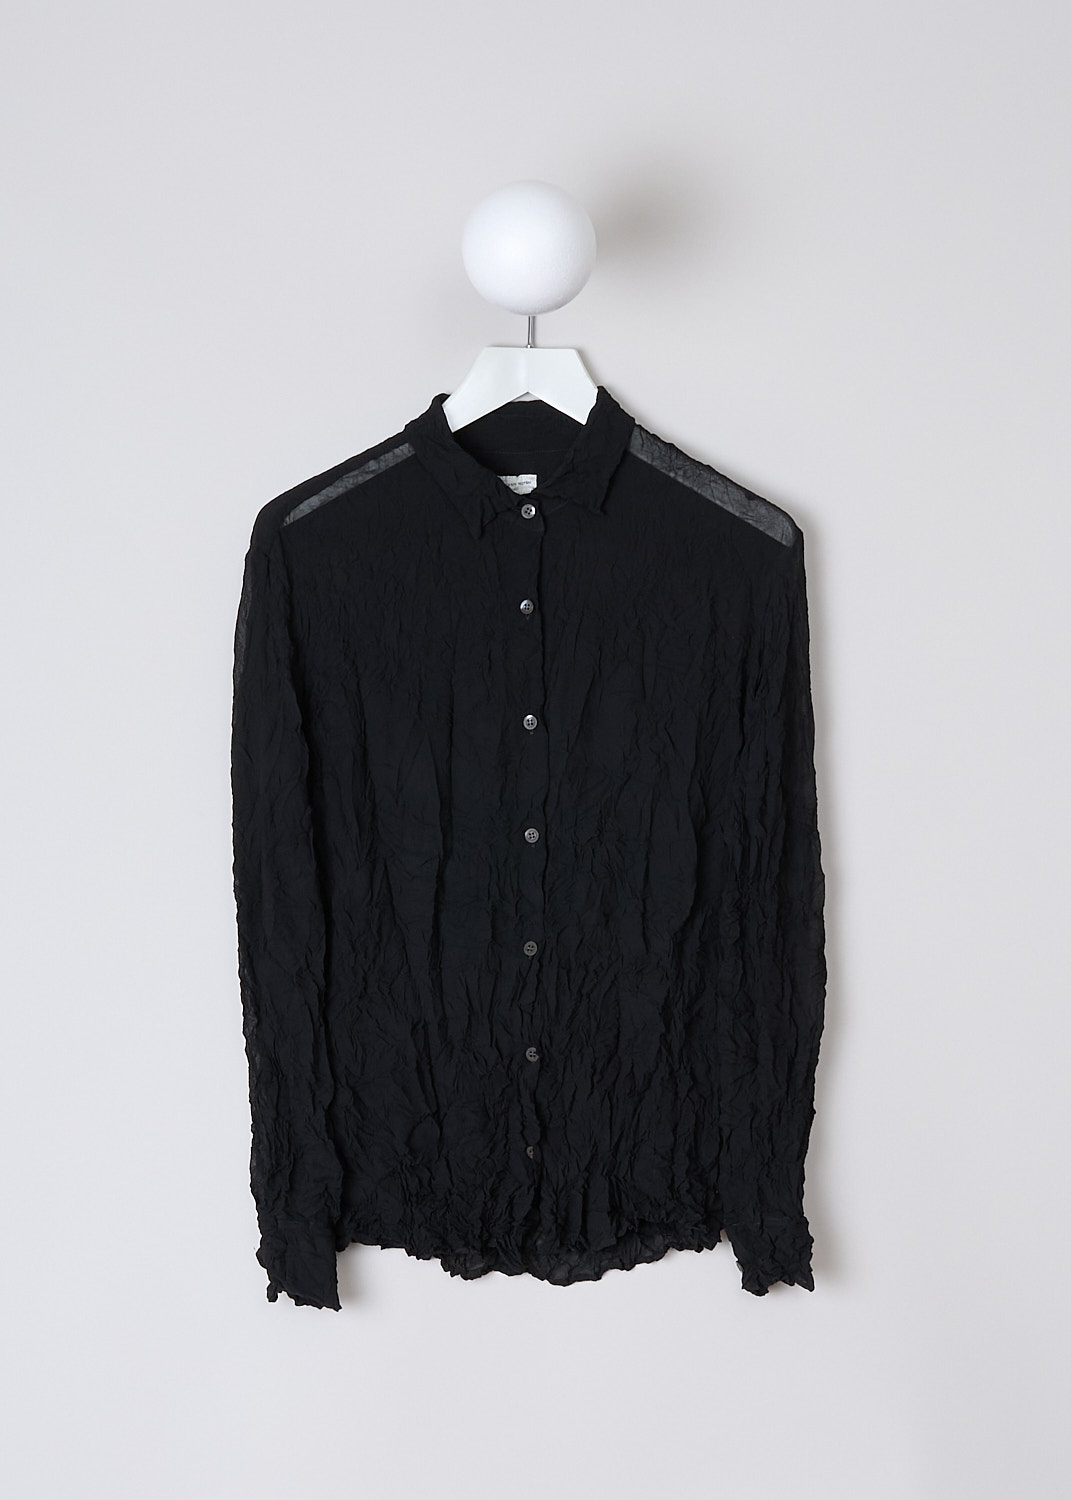 DRIES VAN NOTEN, BLACK CRUSHED BLOUSE, CRUSHED_6265_WW_SHIRT_BLACK, Black, Front, This crushed black blouse has a spread collar and a front button closure. The blouse is slightly see-though. The long sleeves have buttoned cuffs. 
